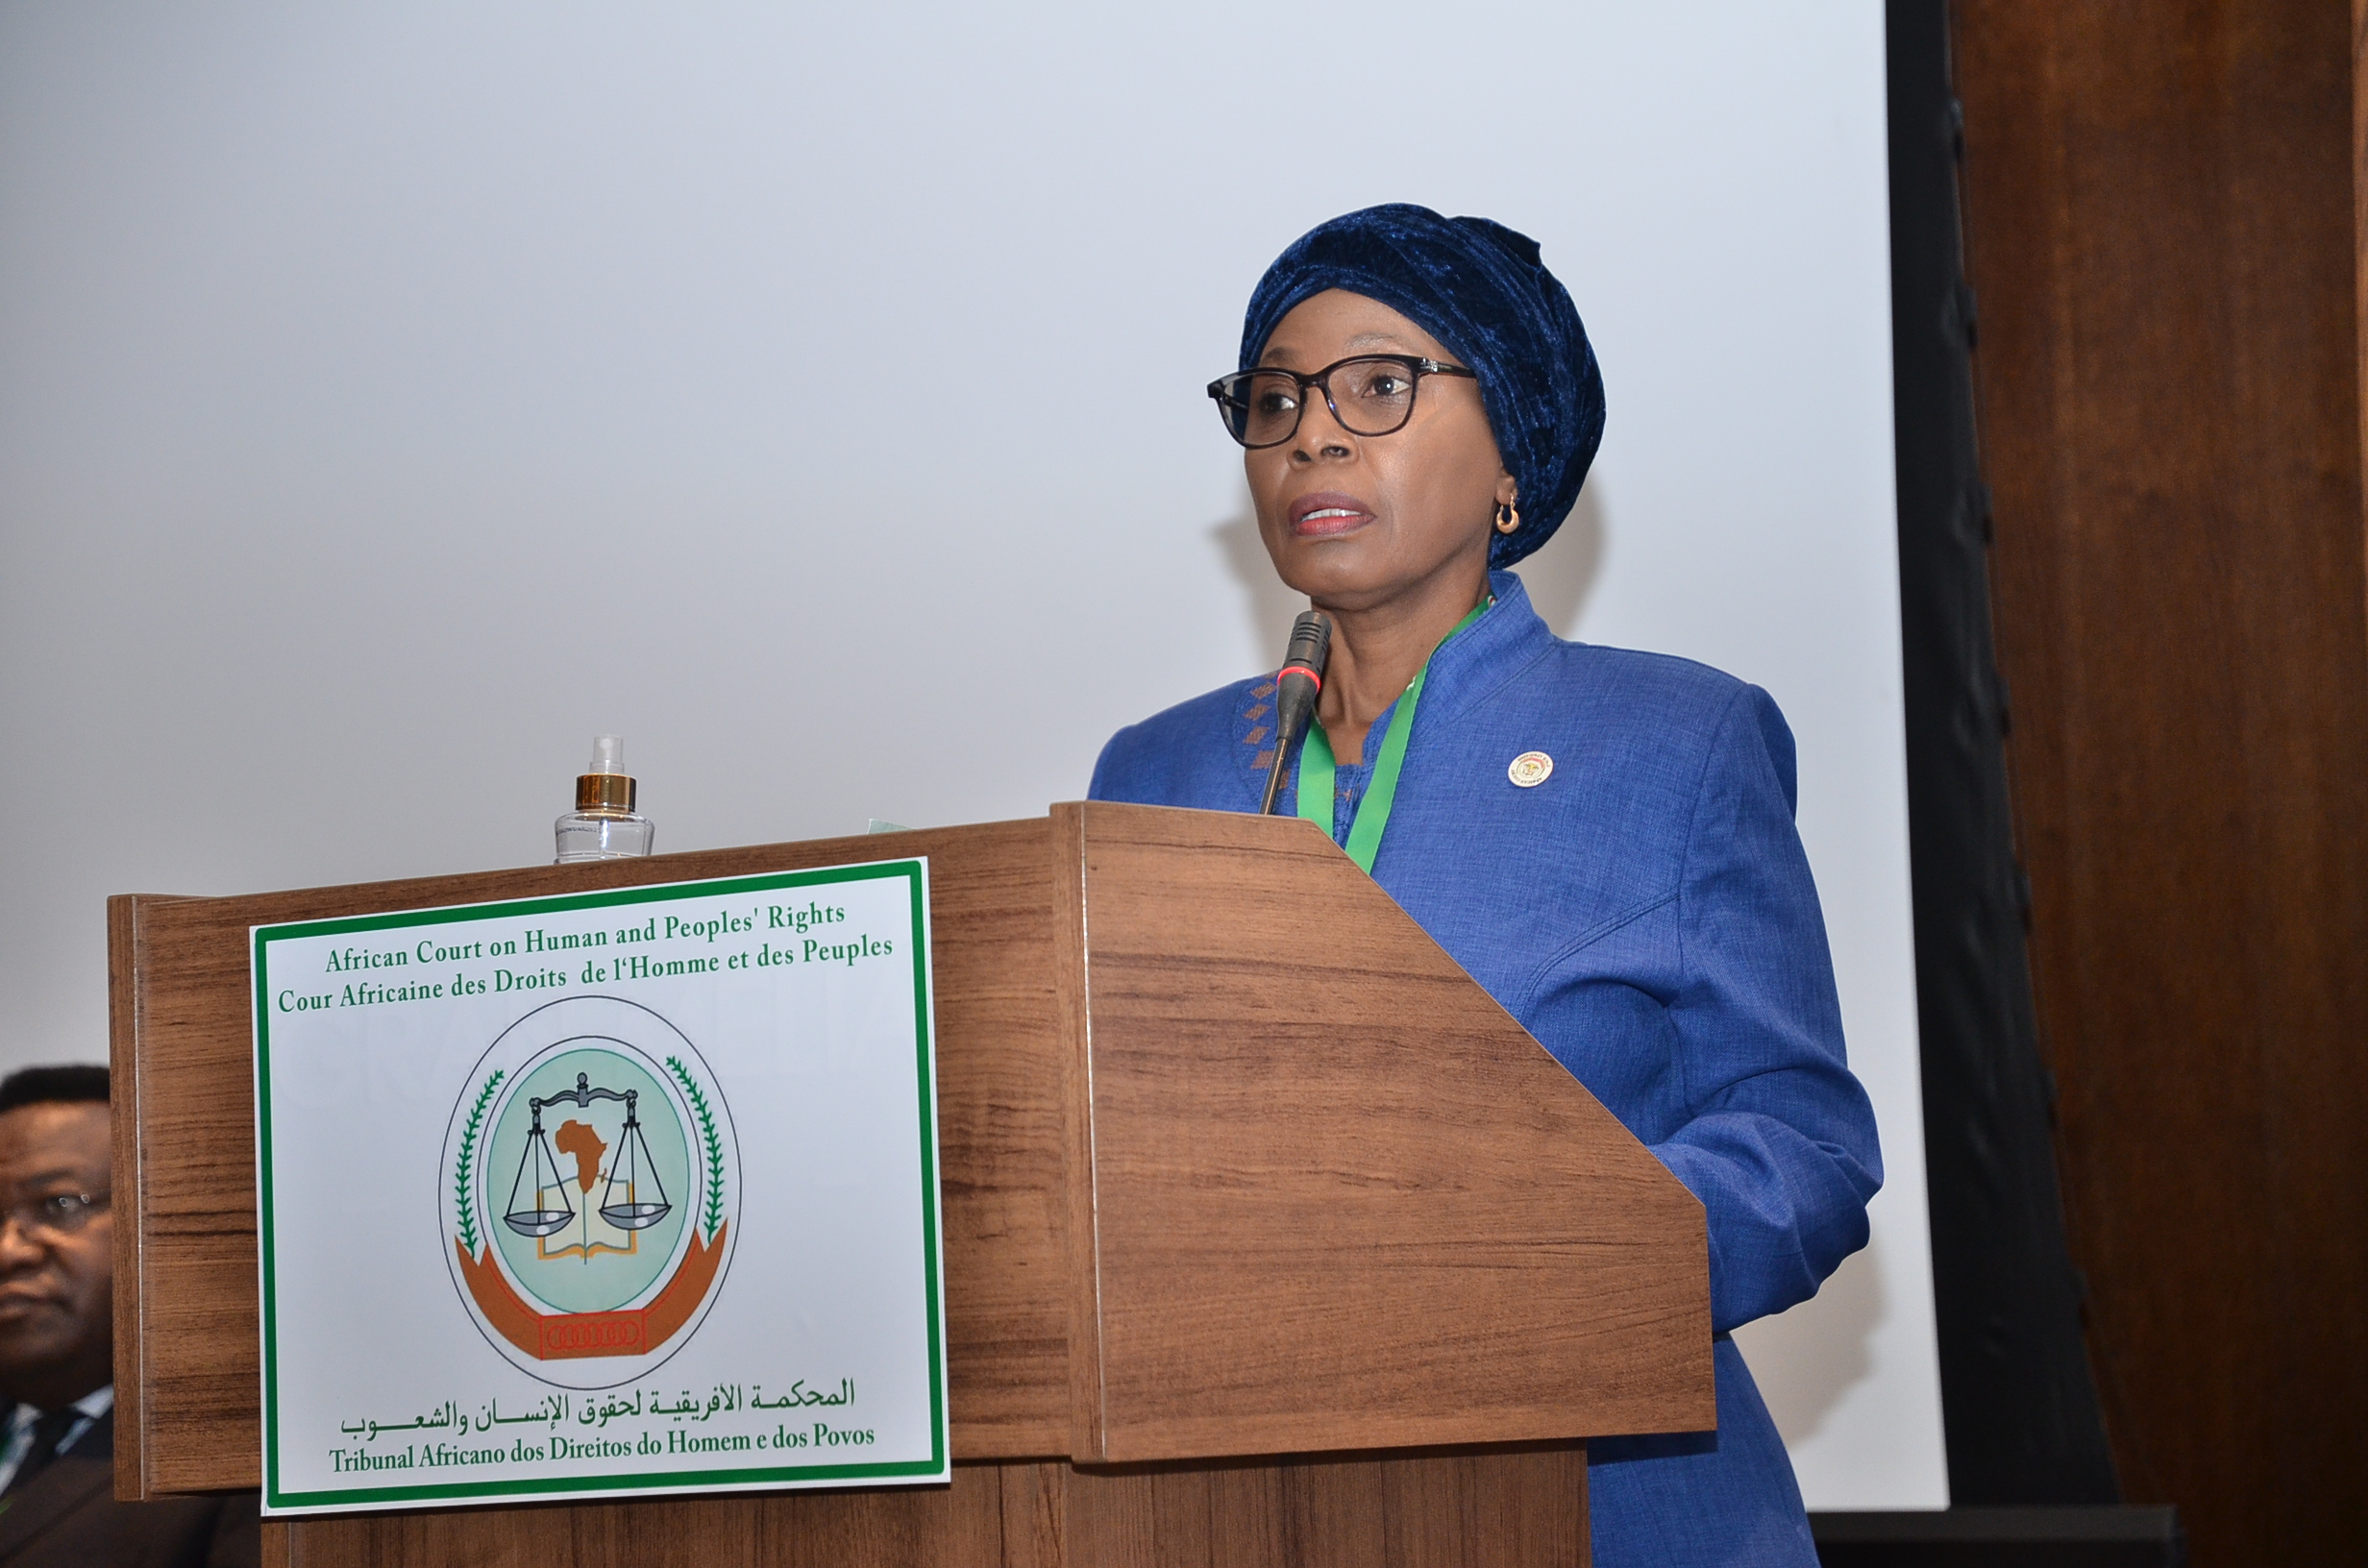 STATEMENT BY THE PRESIDENT OF THE AFRICAN COURT HON. LADY JUSTICE IMANI DAUD ABOUD AT THE COMMEMORATION OF THE INTERNATIONAL DAY OF THE AFRICAN CHILD